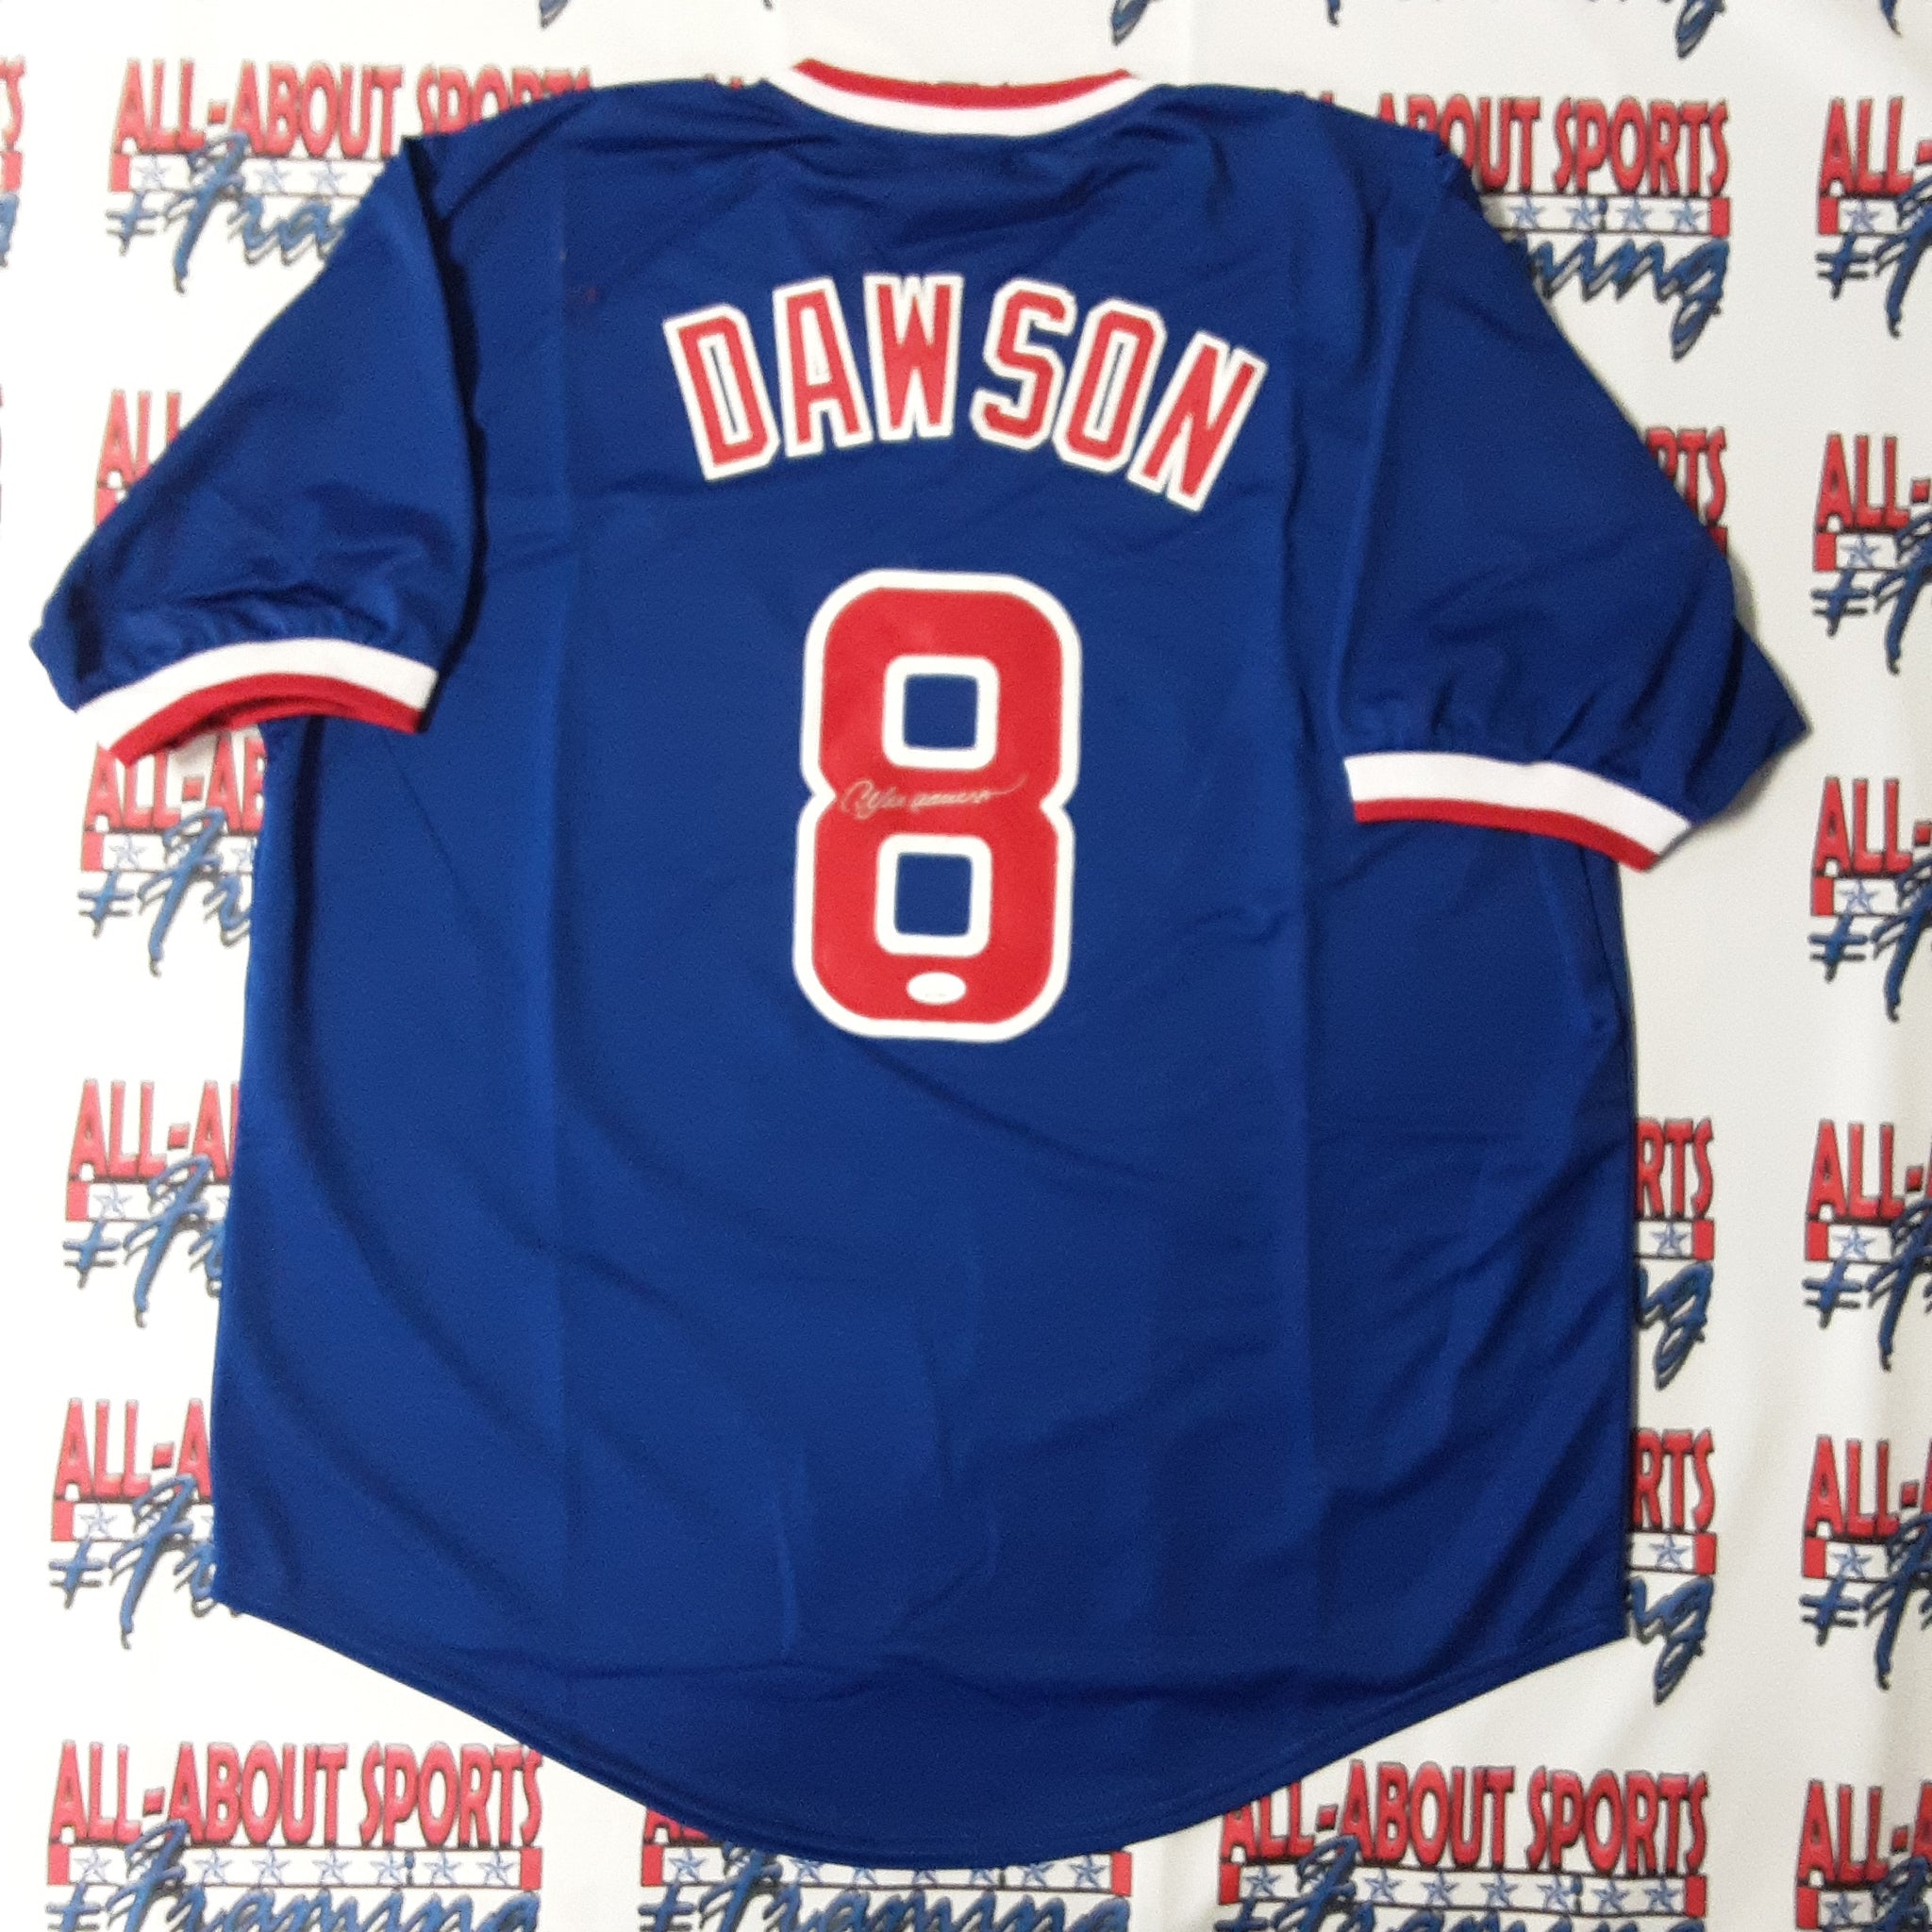 Andre Dawson Authentic Signed Pro Style Jersey Autographed JSA-